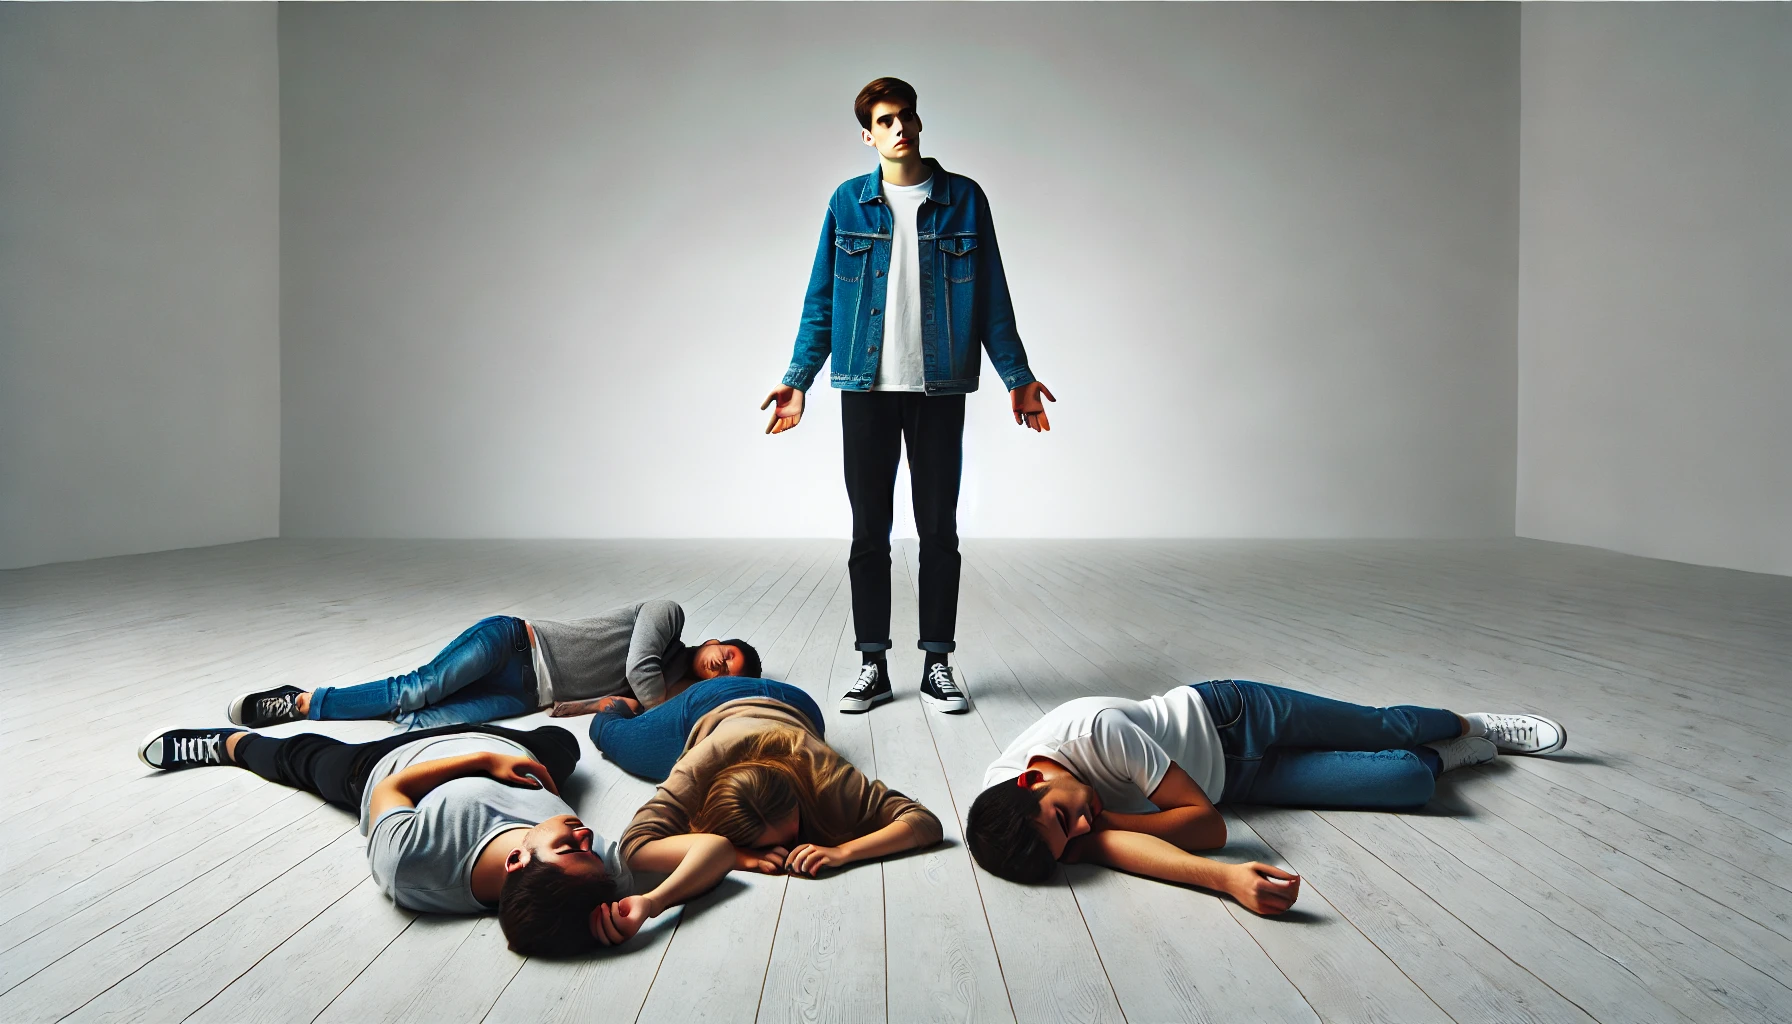 A staged scene in a white room with wooden floors. A young man stands in the center, wearing a blue denim jacket, white t-shirt, and dark pants. He has his arms slightly raised, palms up, with a confused or questioning expression. Around him on the floor lie four people - two men and two women - in positions suggesting unconsciousness, as if requiring first aid triage. The standing figure appears to be reacting to or contemplating the situation of the seemingly unconscious individuals on the floor.